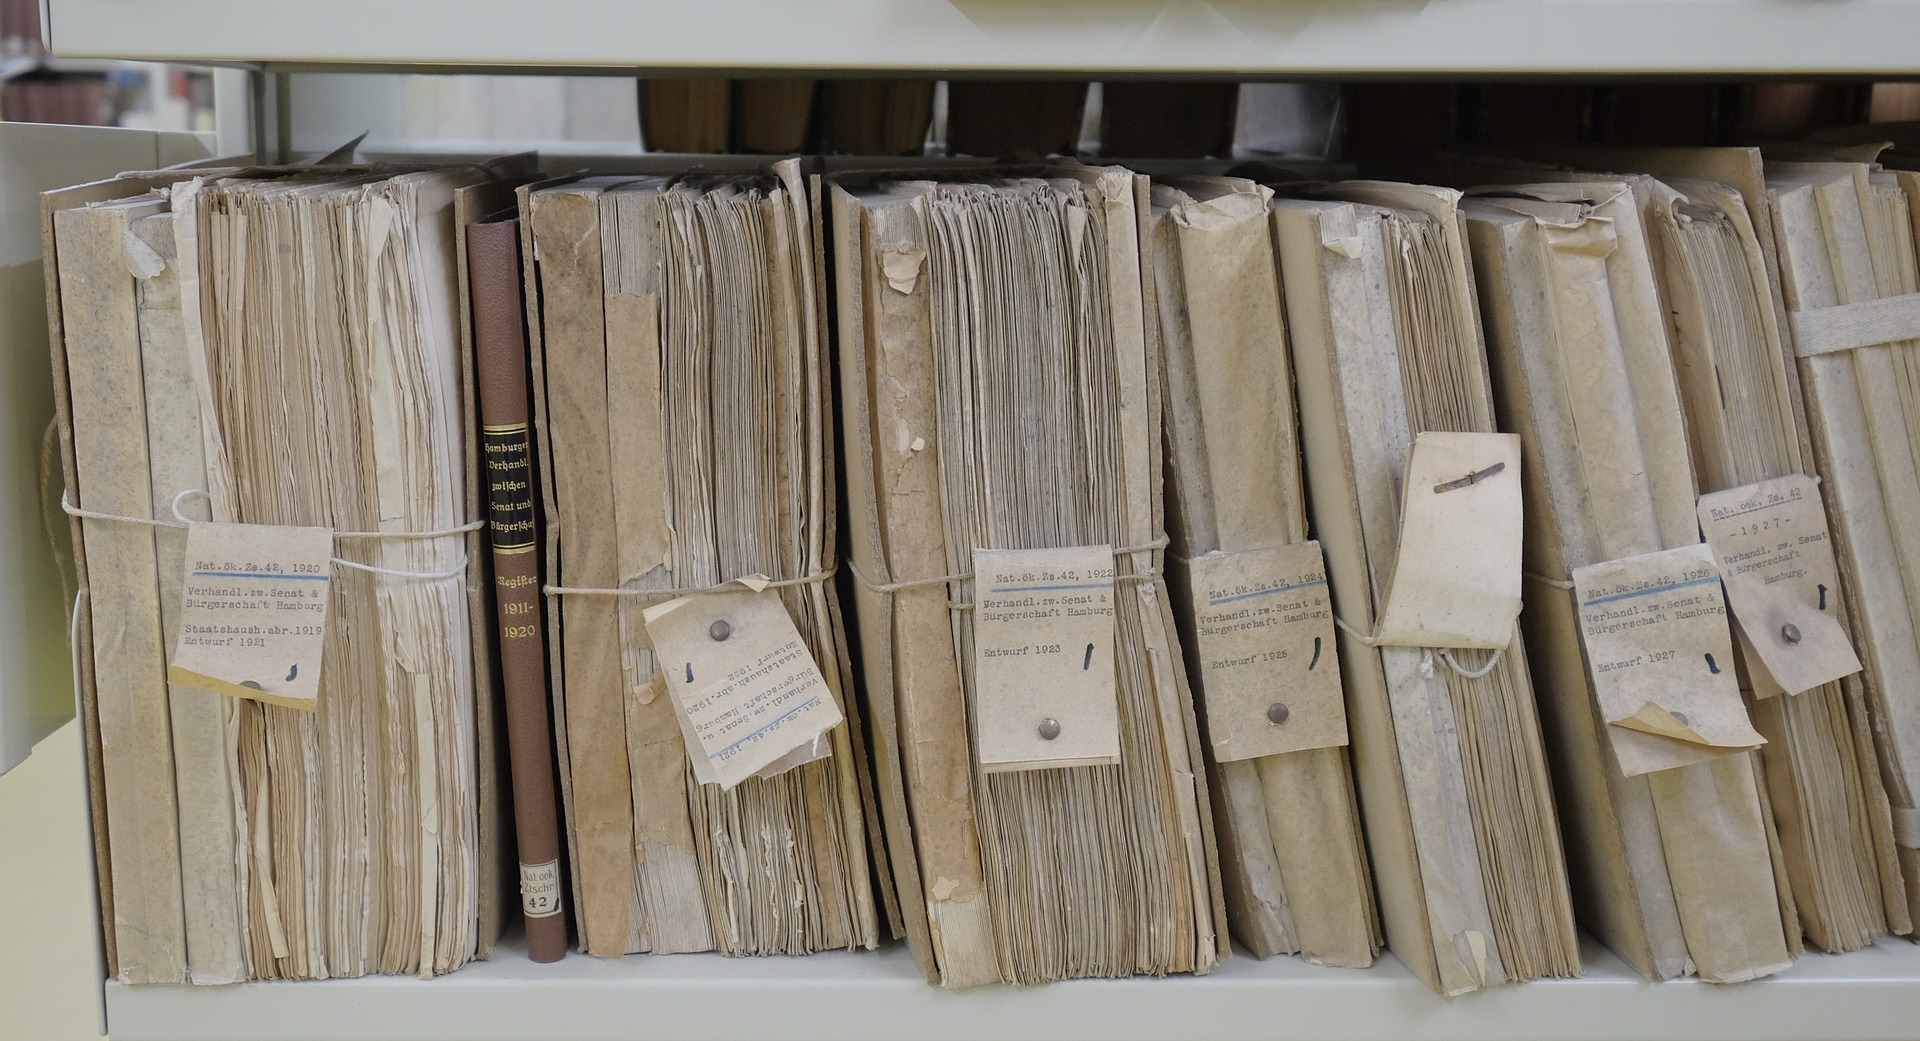 Several filing folders are placed side by side vertically. They have several papers stuffed into them, with old labels around the folder itself.